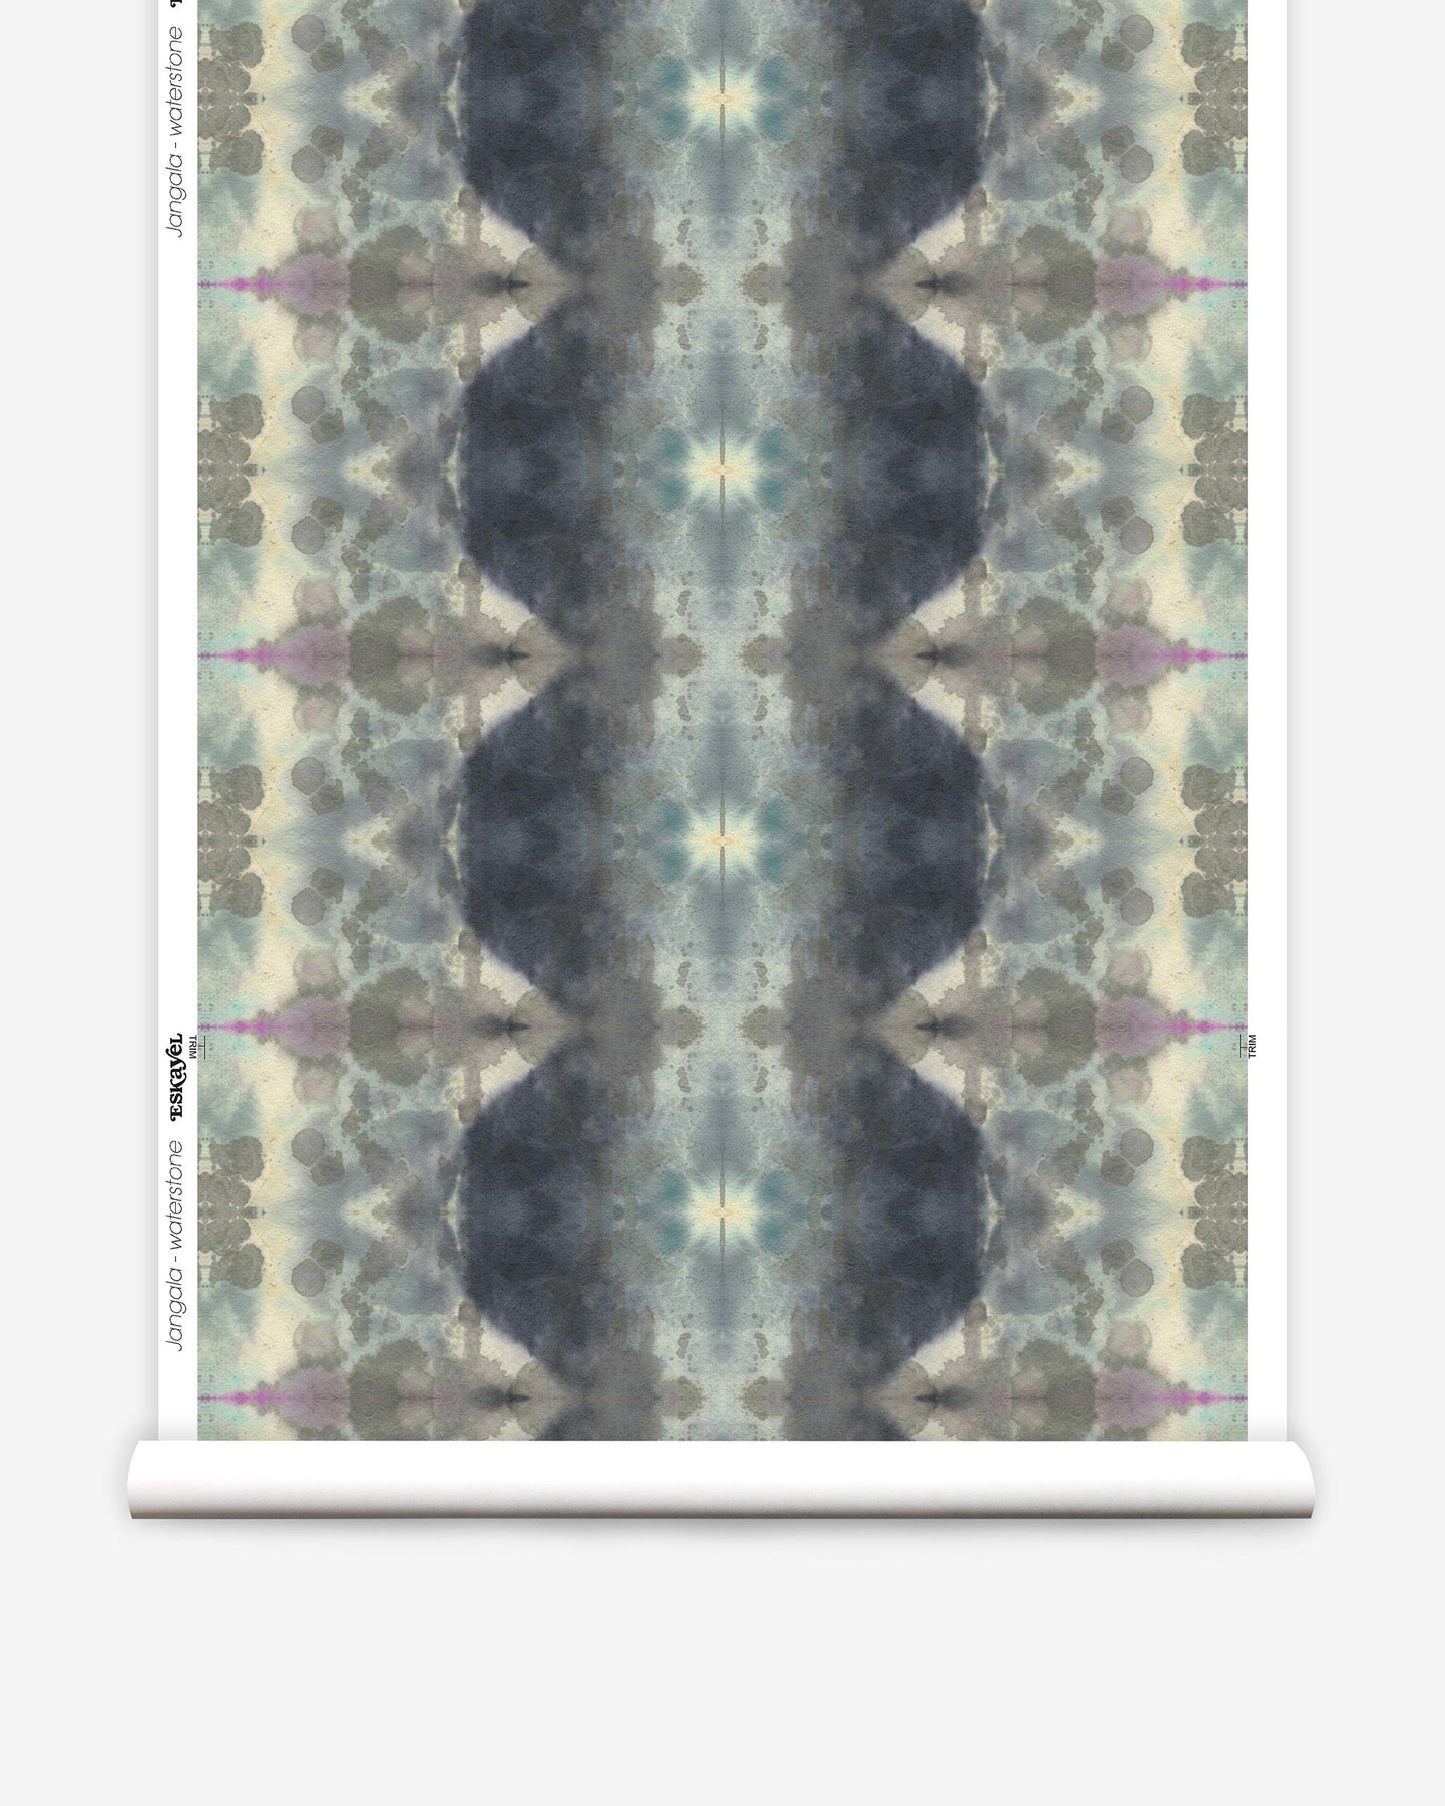 A blue and white Jangala Wallpaper Waterstone with an abstract pattern